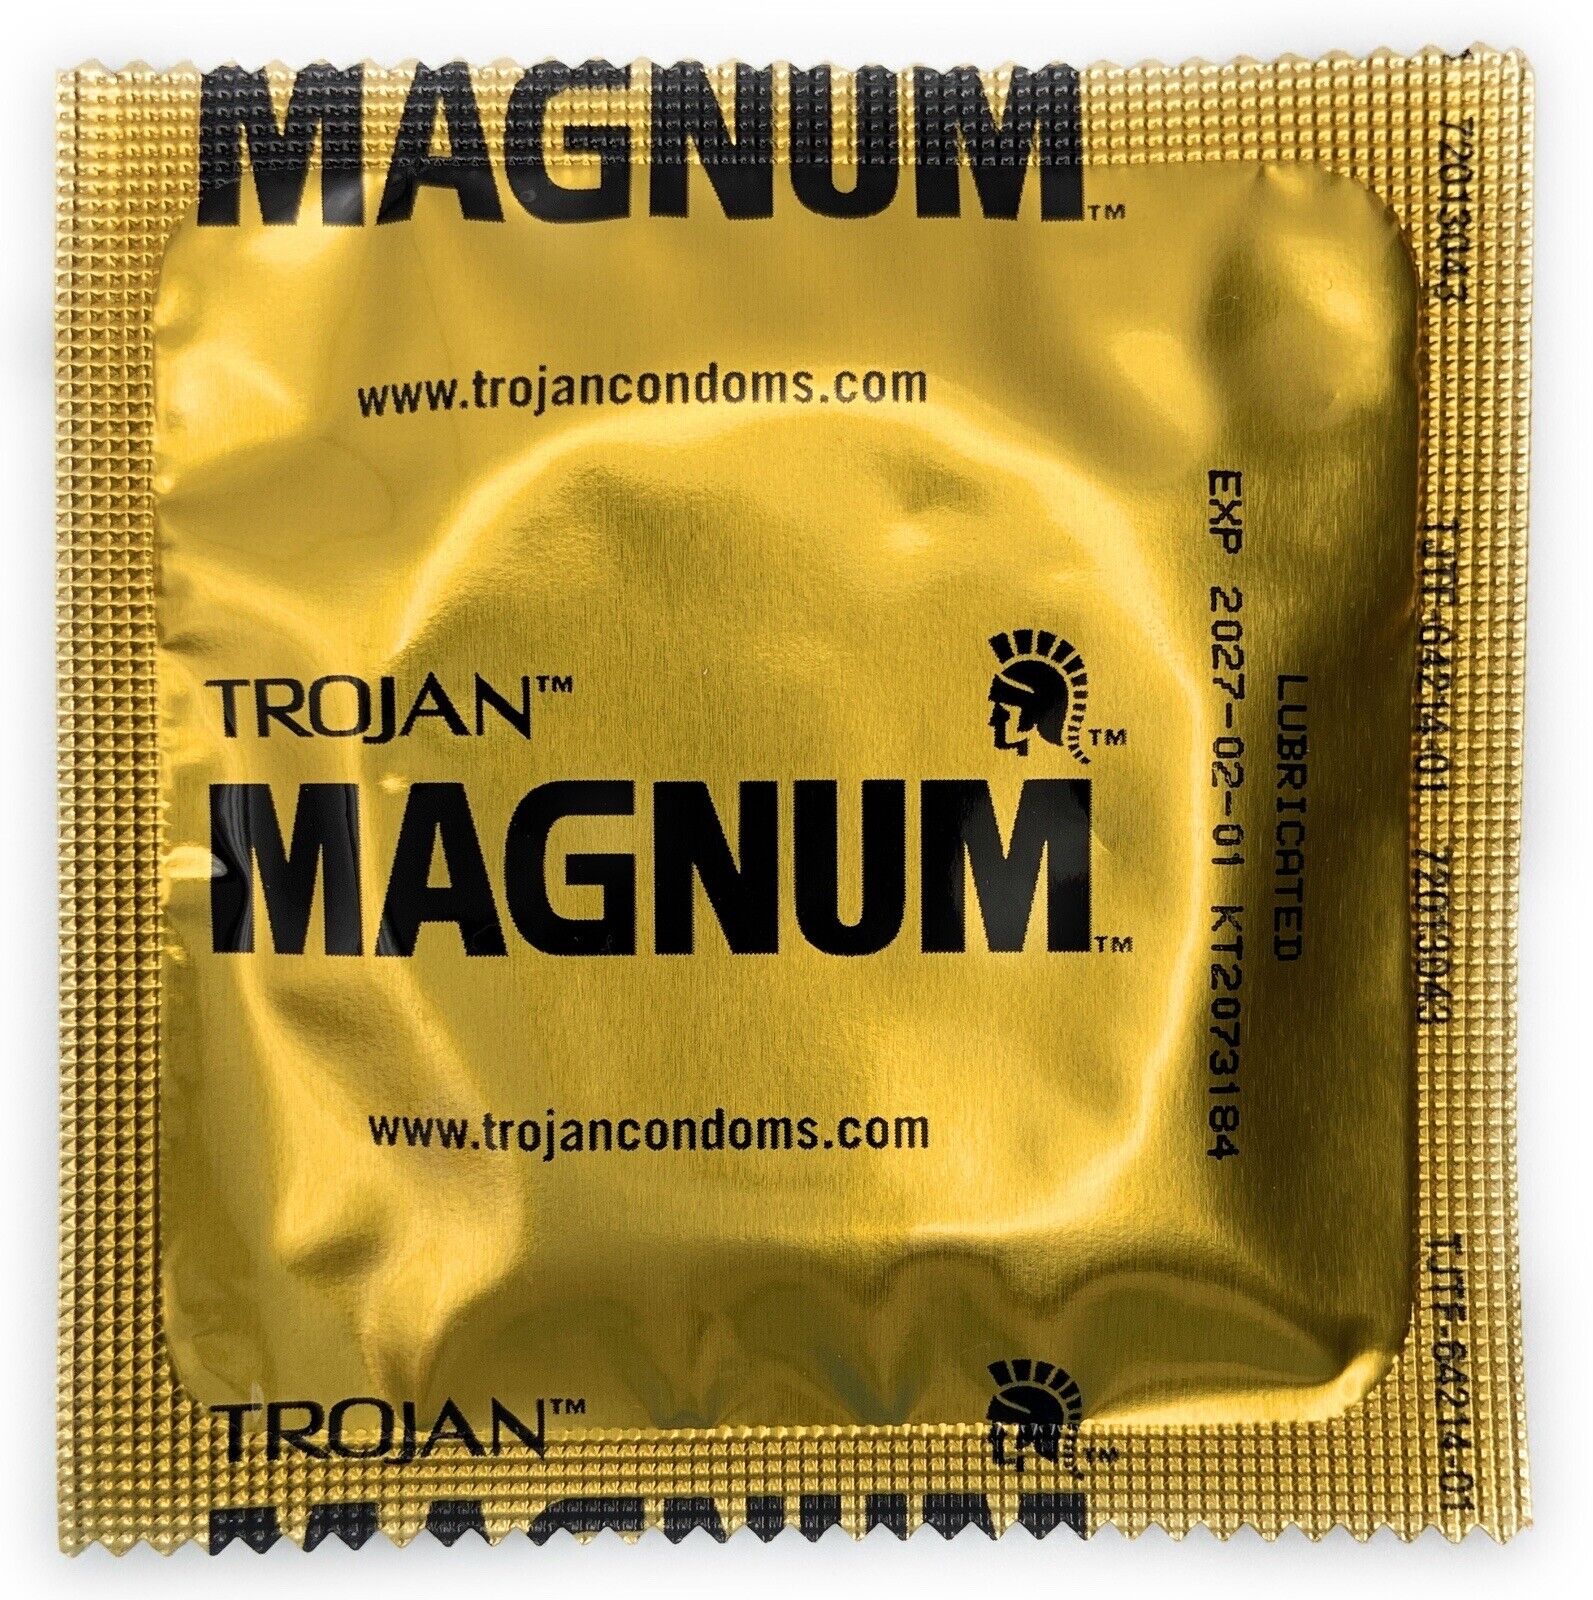 Looking to Buy Magnum Condoms in Bulk This Year. : Here